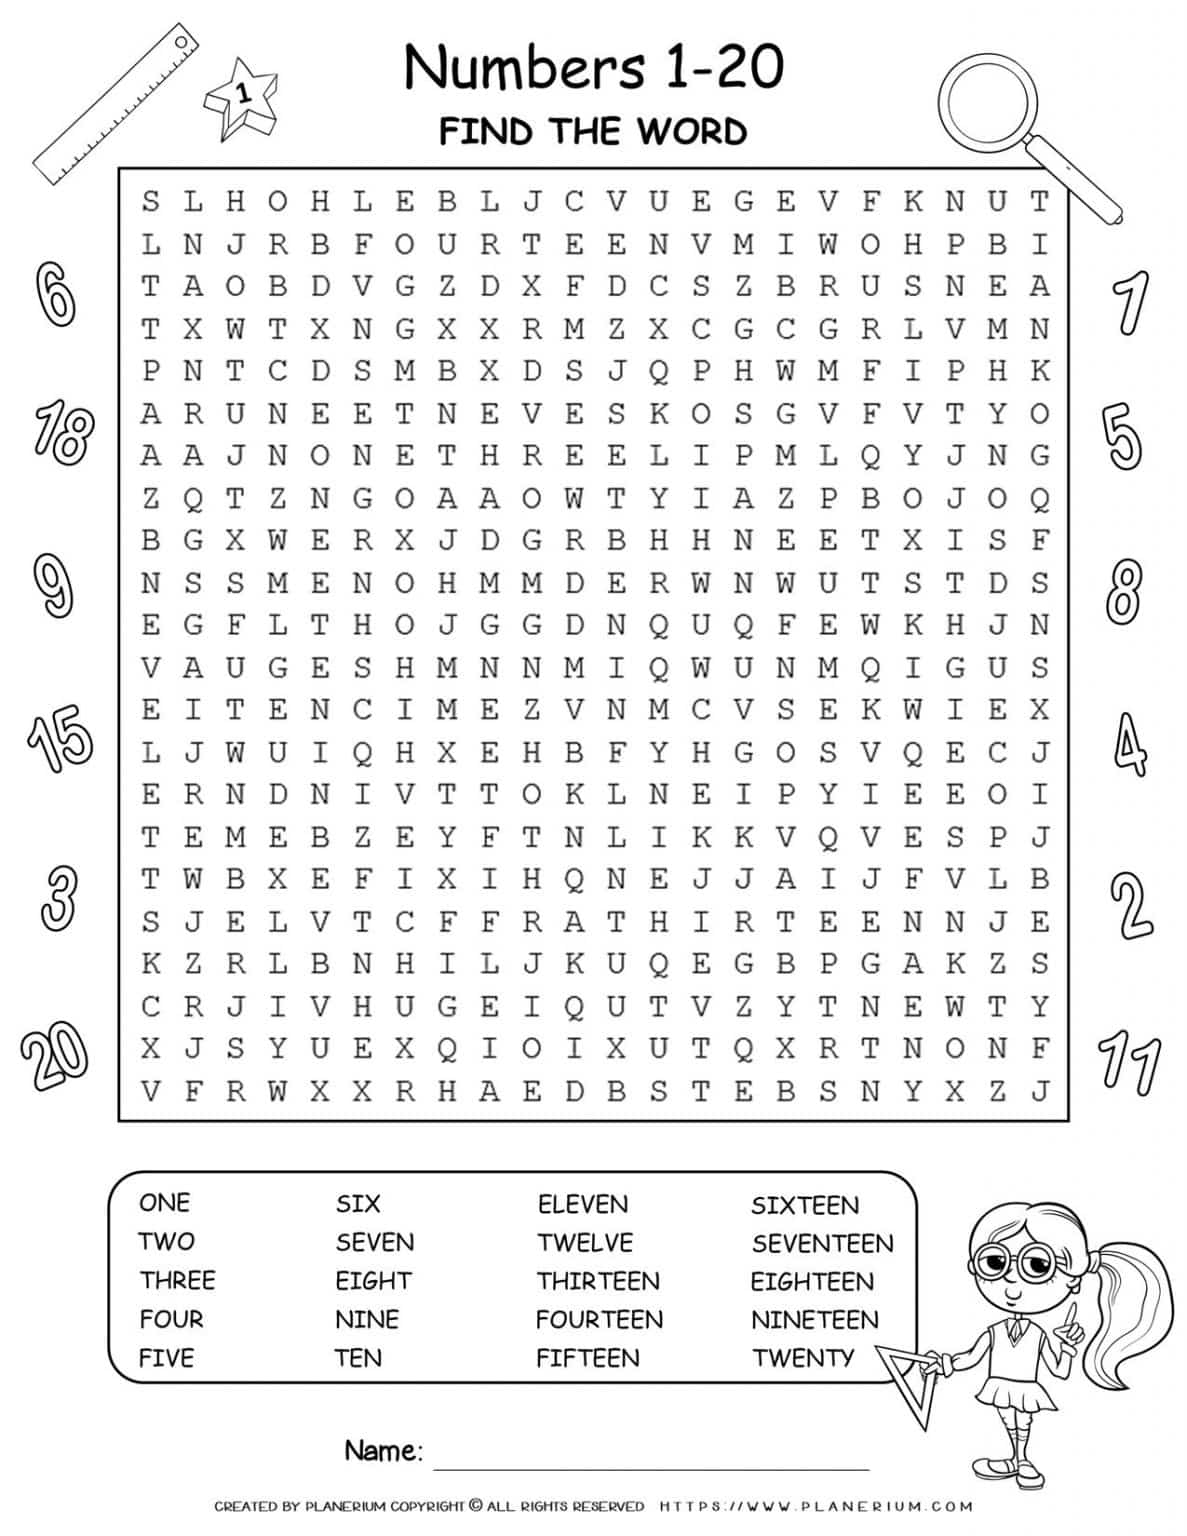 numbers-worksheets-find-the-word-1-20-planerium